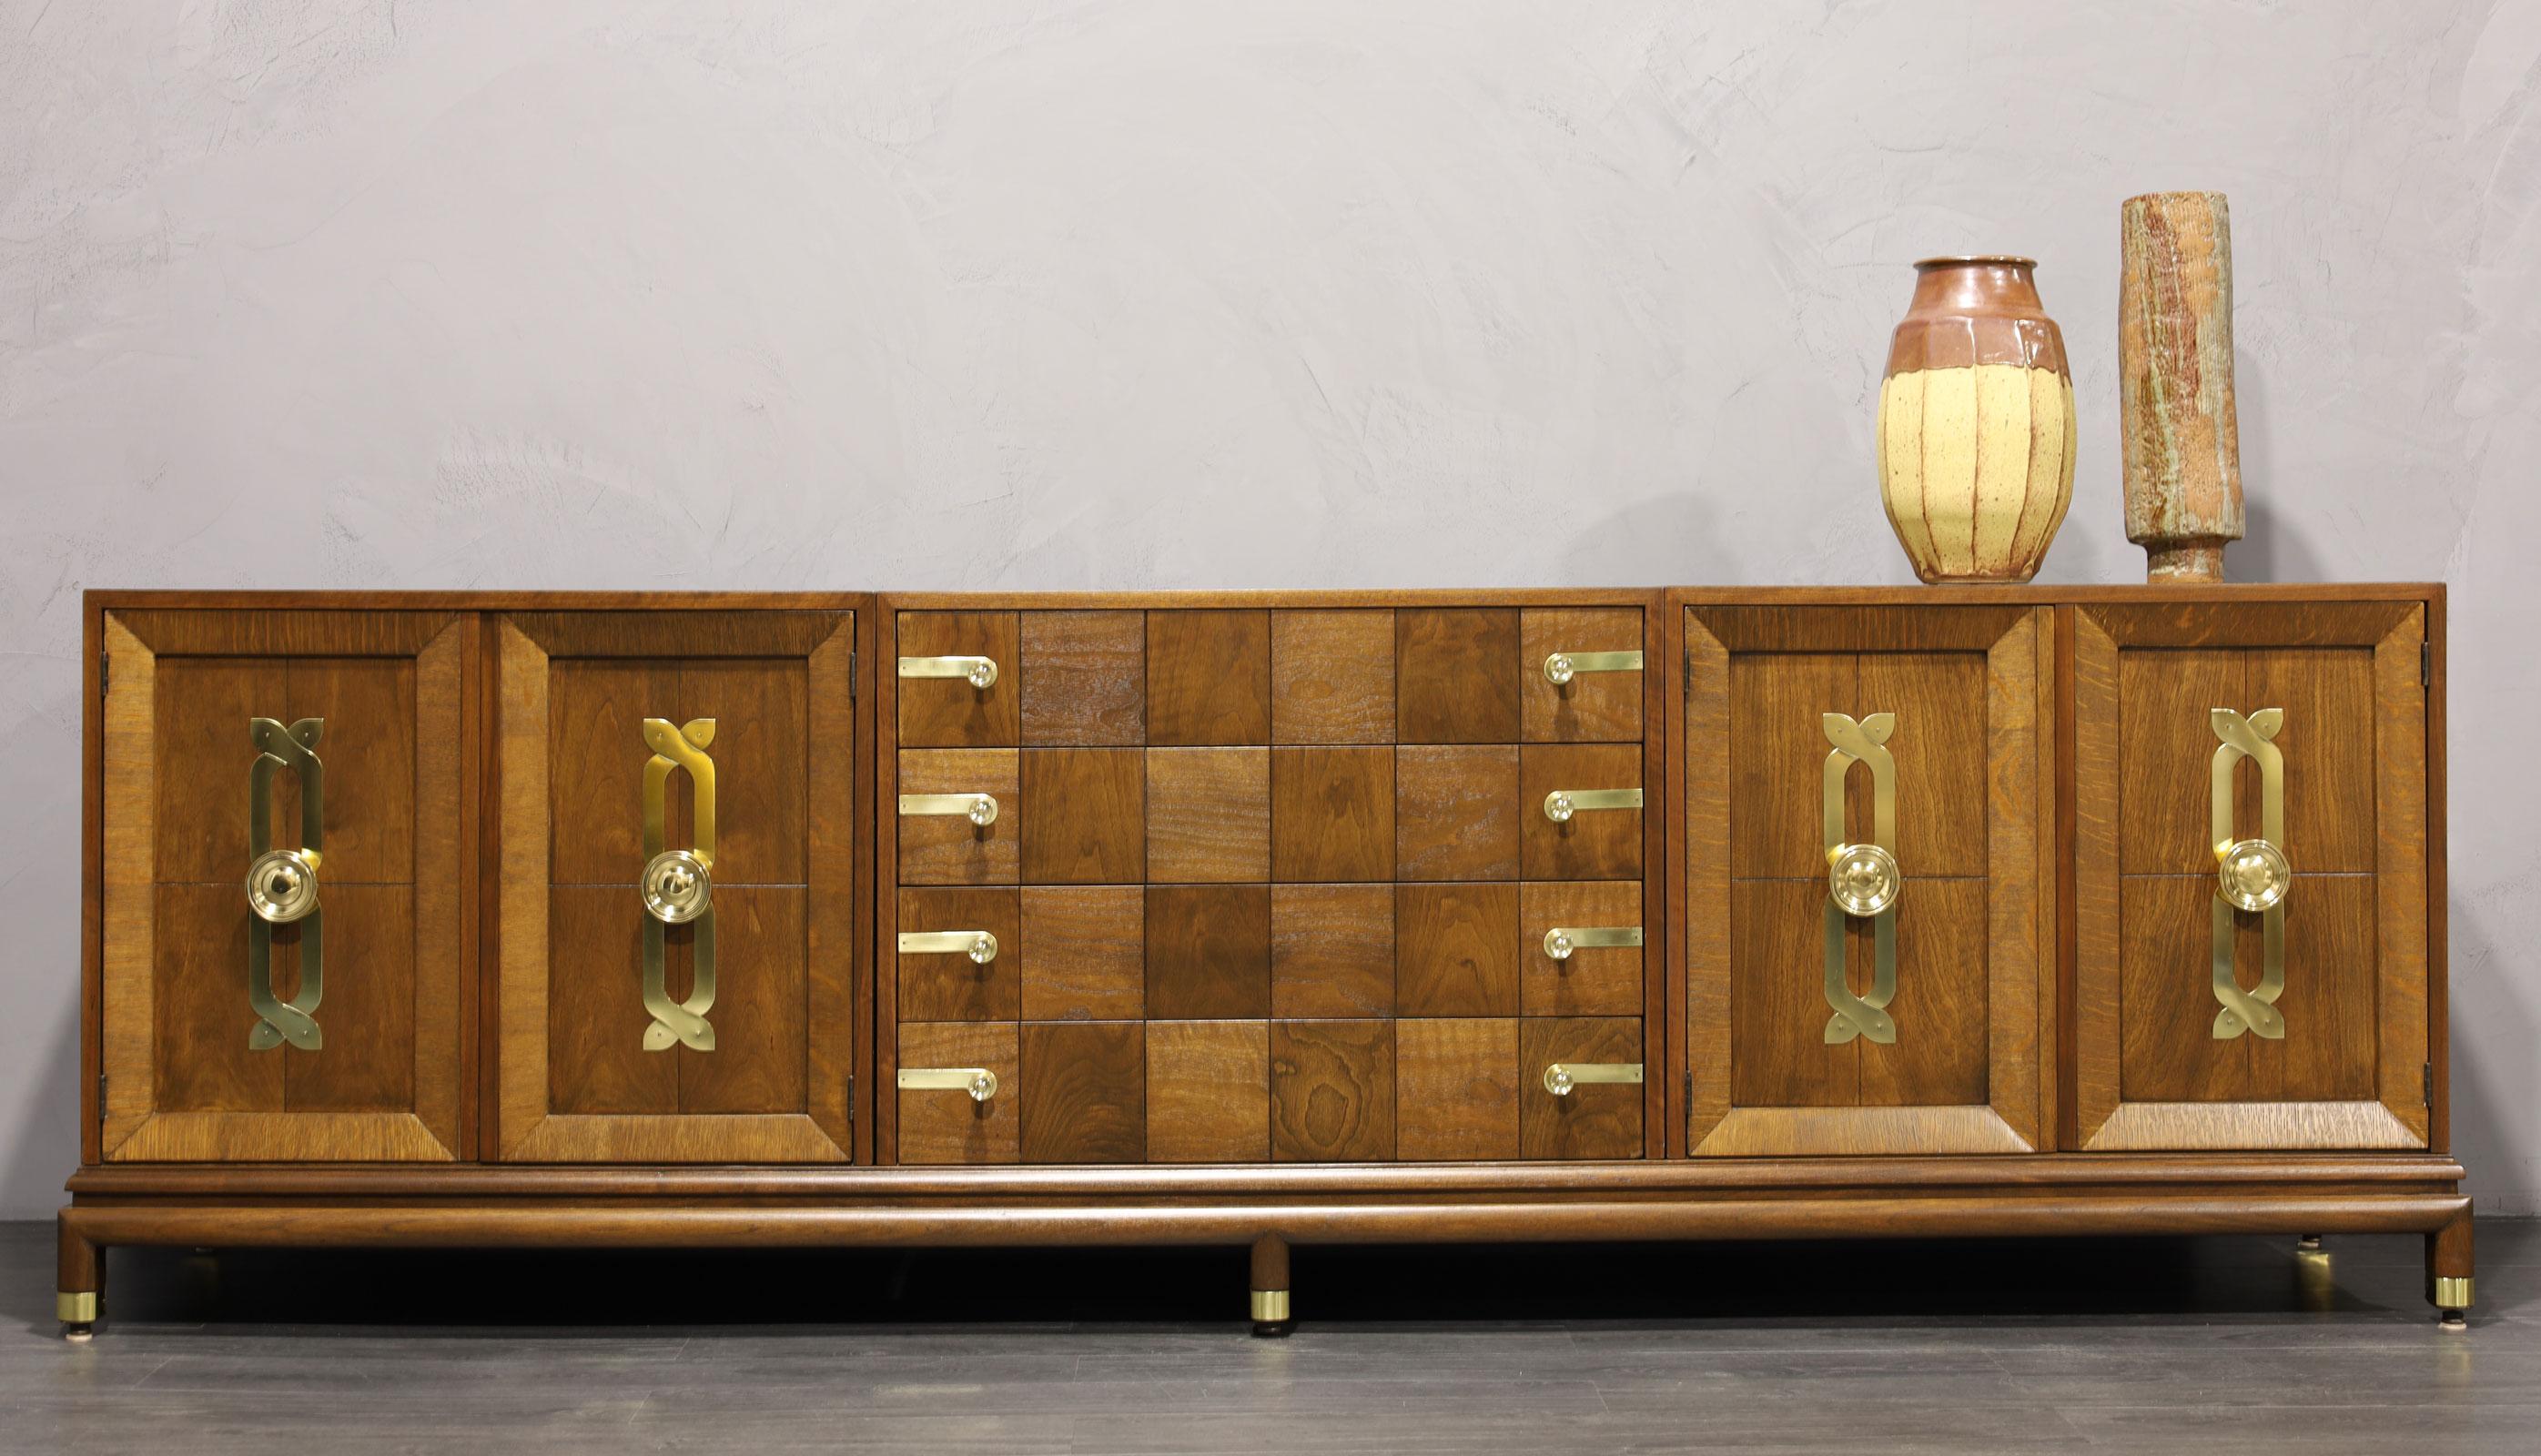 We have fully restored this beautiful sideboard by Renzo Rutili for John Stuart/Johnson Furniture Company. The sideboard features three separate cabinets that rest in a single base. Beautiful brass hardware throughout. The brass has been polished